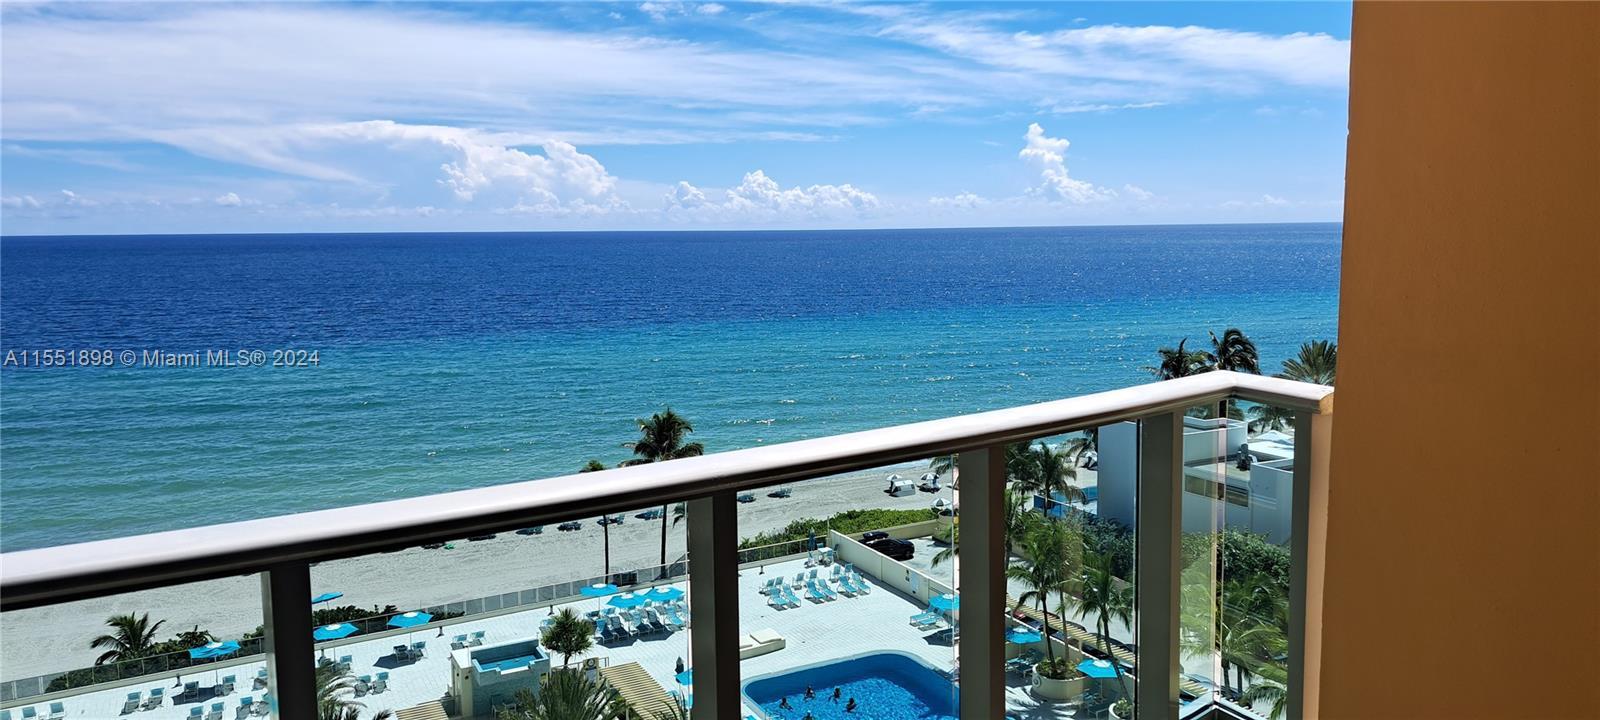 Photo of 2501 S Ocean Dr #1021 in Hollywood, FL